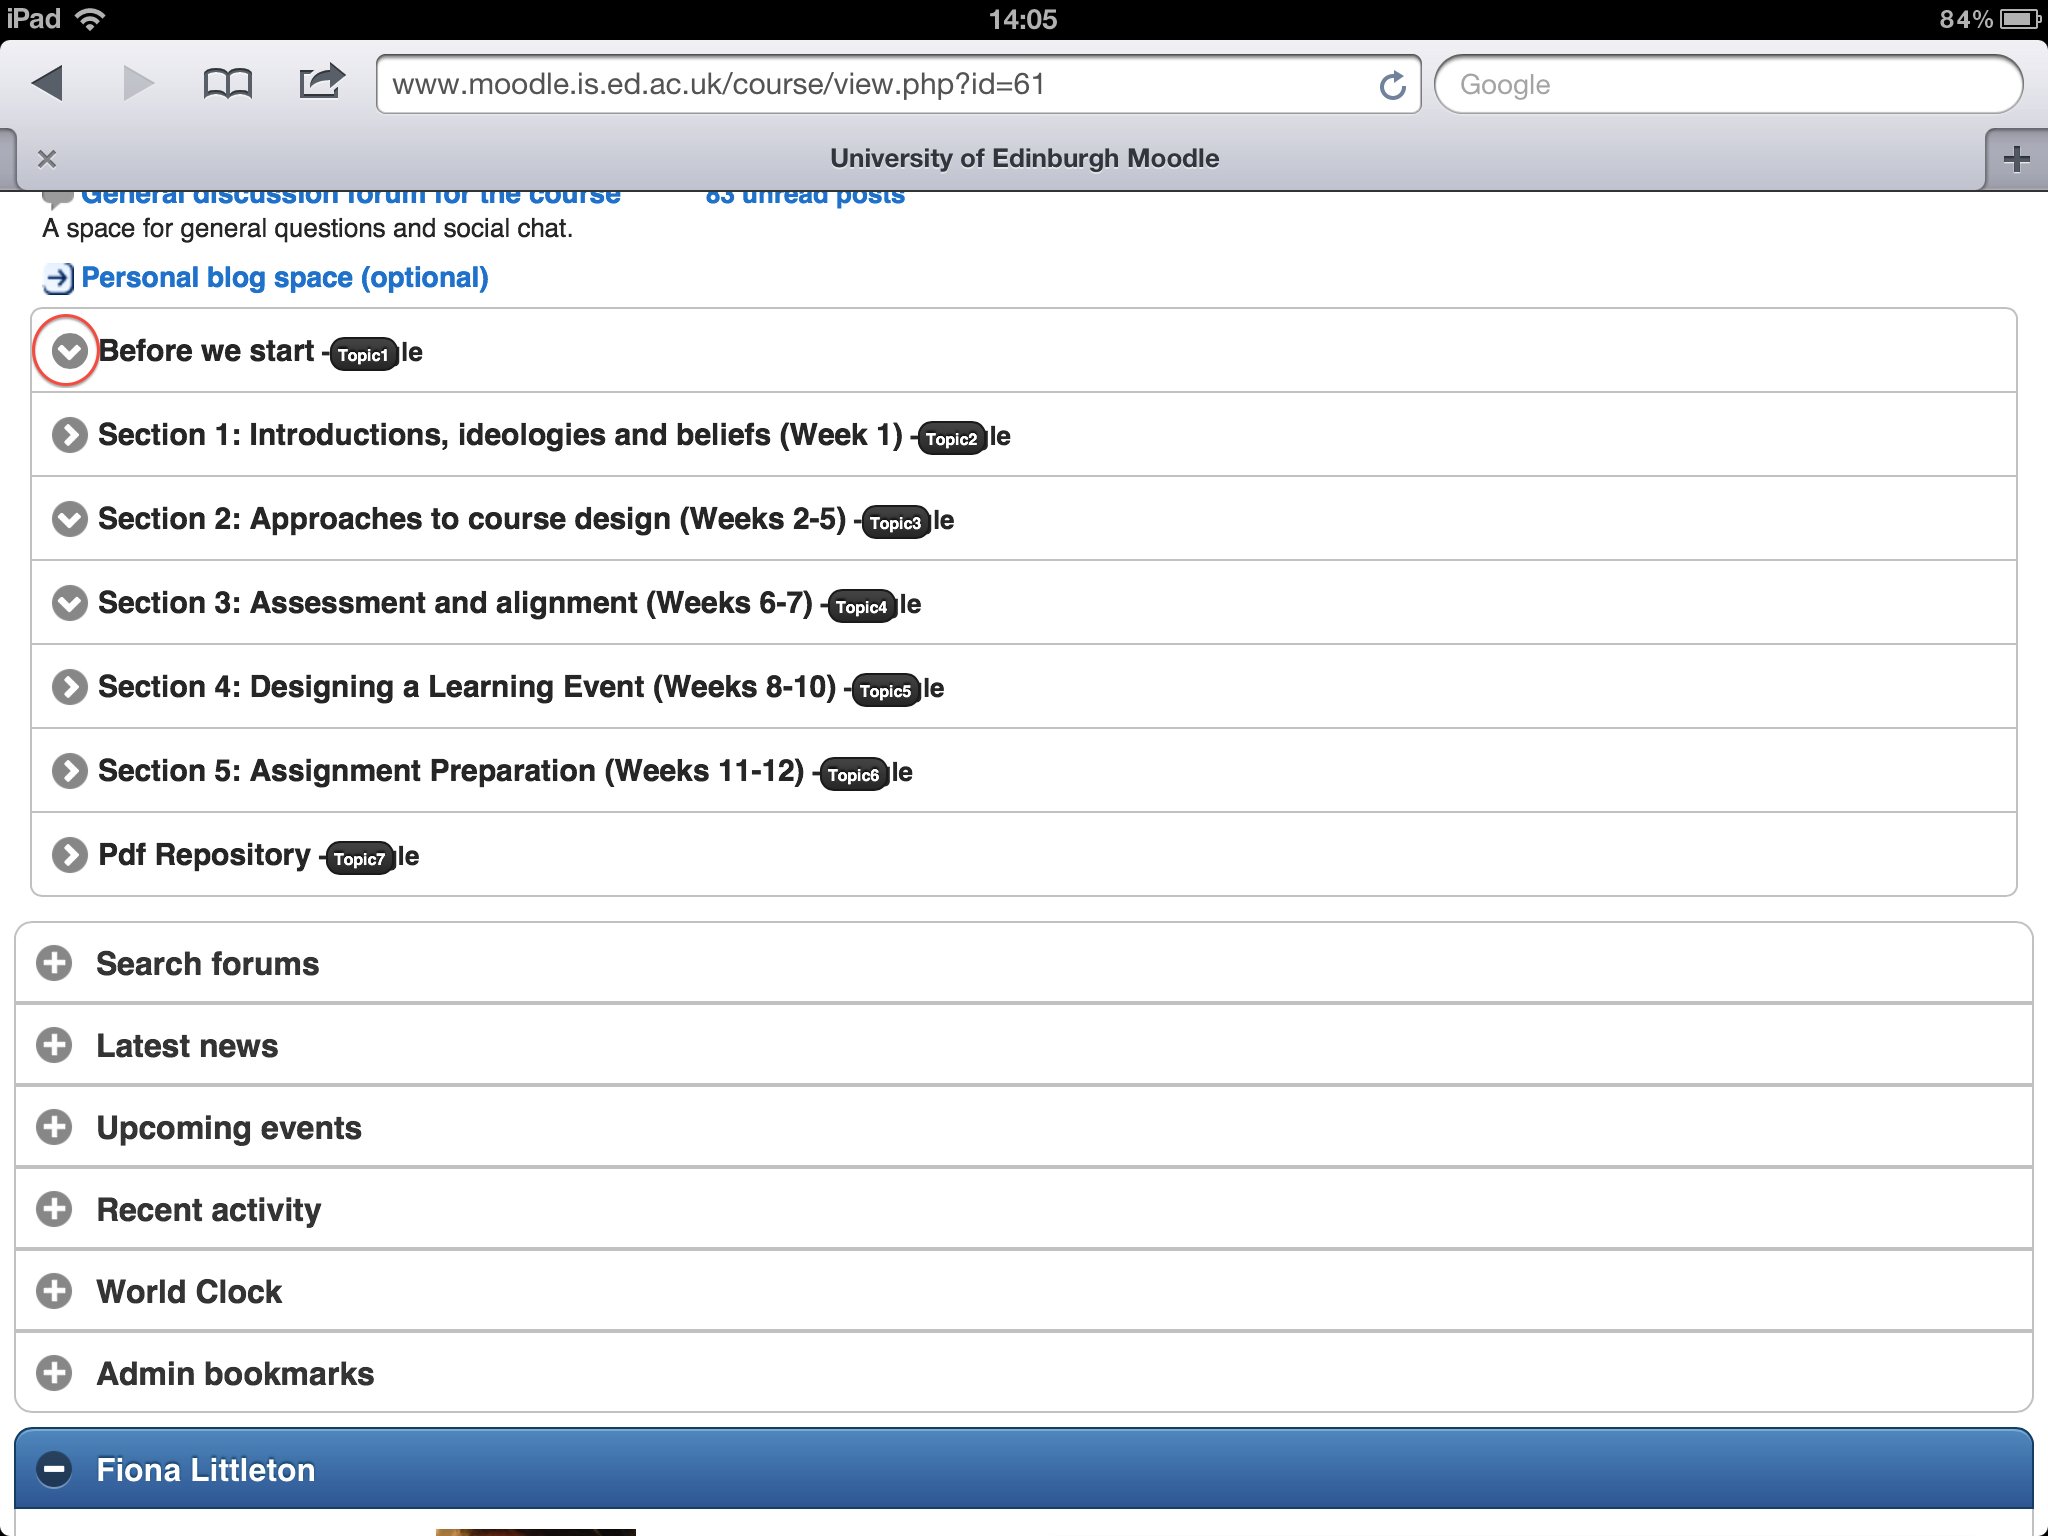 Attachment moodle_ipad_collapsedtopics_annotated.jpg